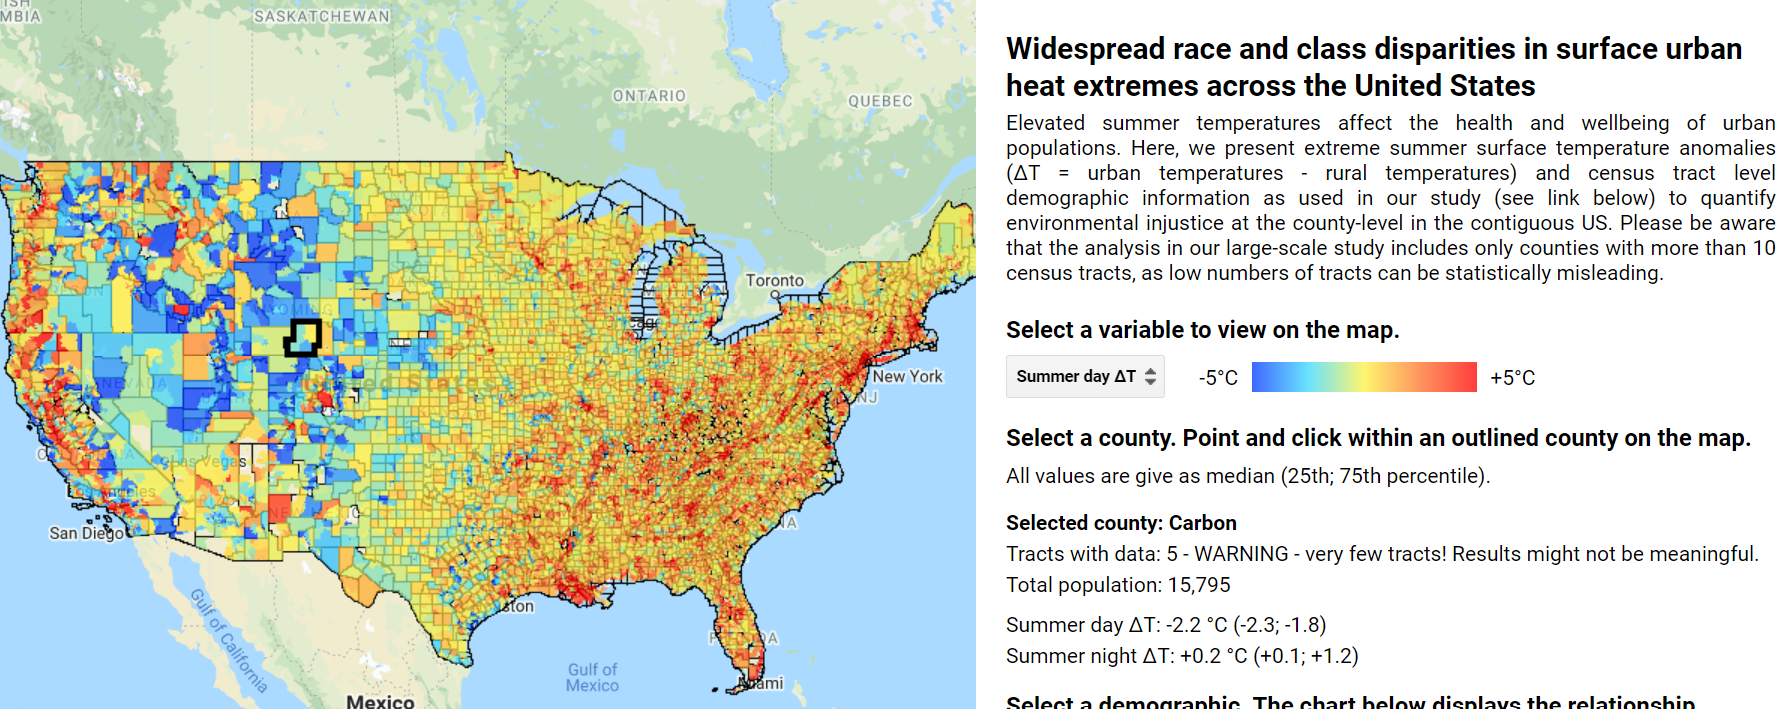 Image of the widespread race and class disparities in surface urban heat extremes across the United States.